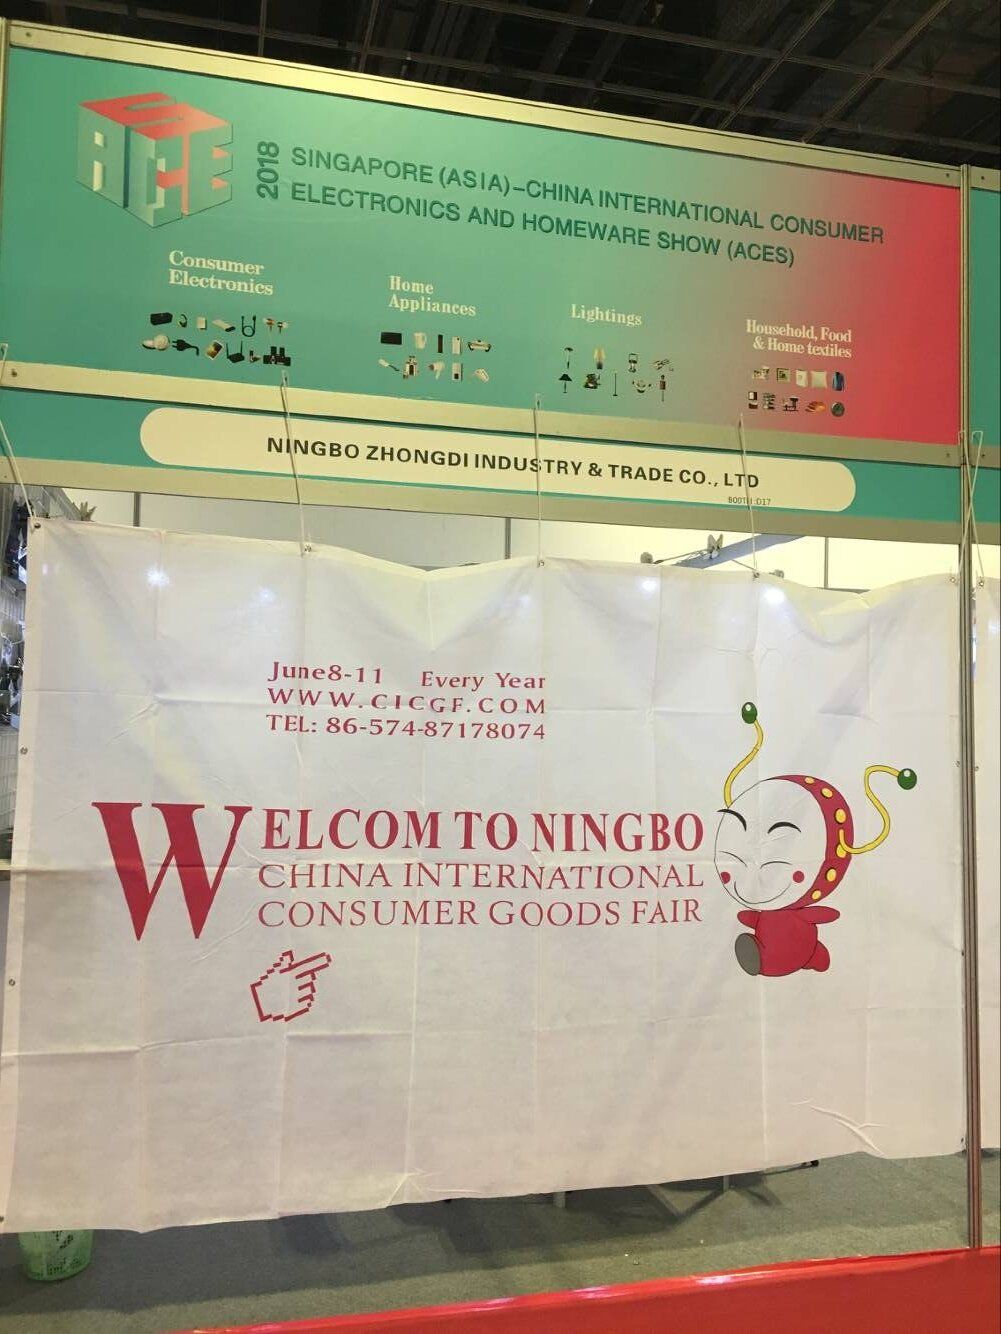 Welcome to our booth 2018 Asia Consumer Electronics and Homeware Show(ACES)